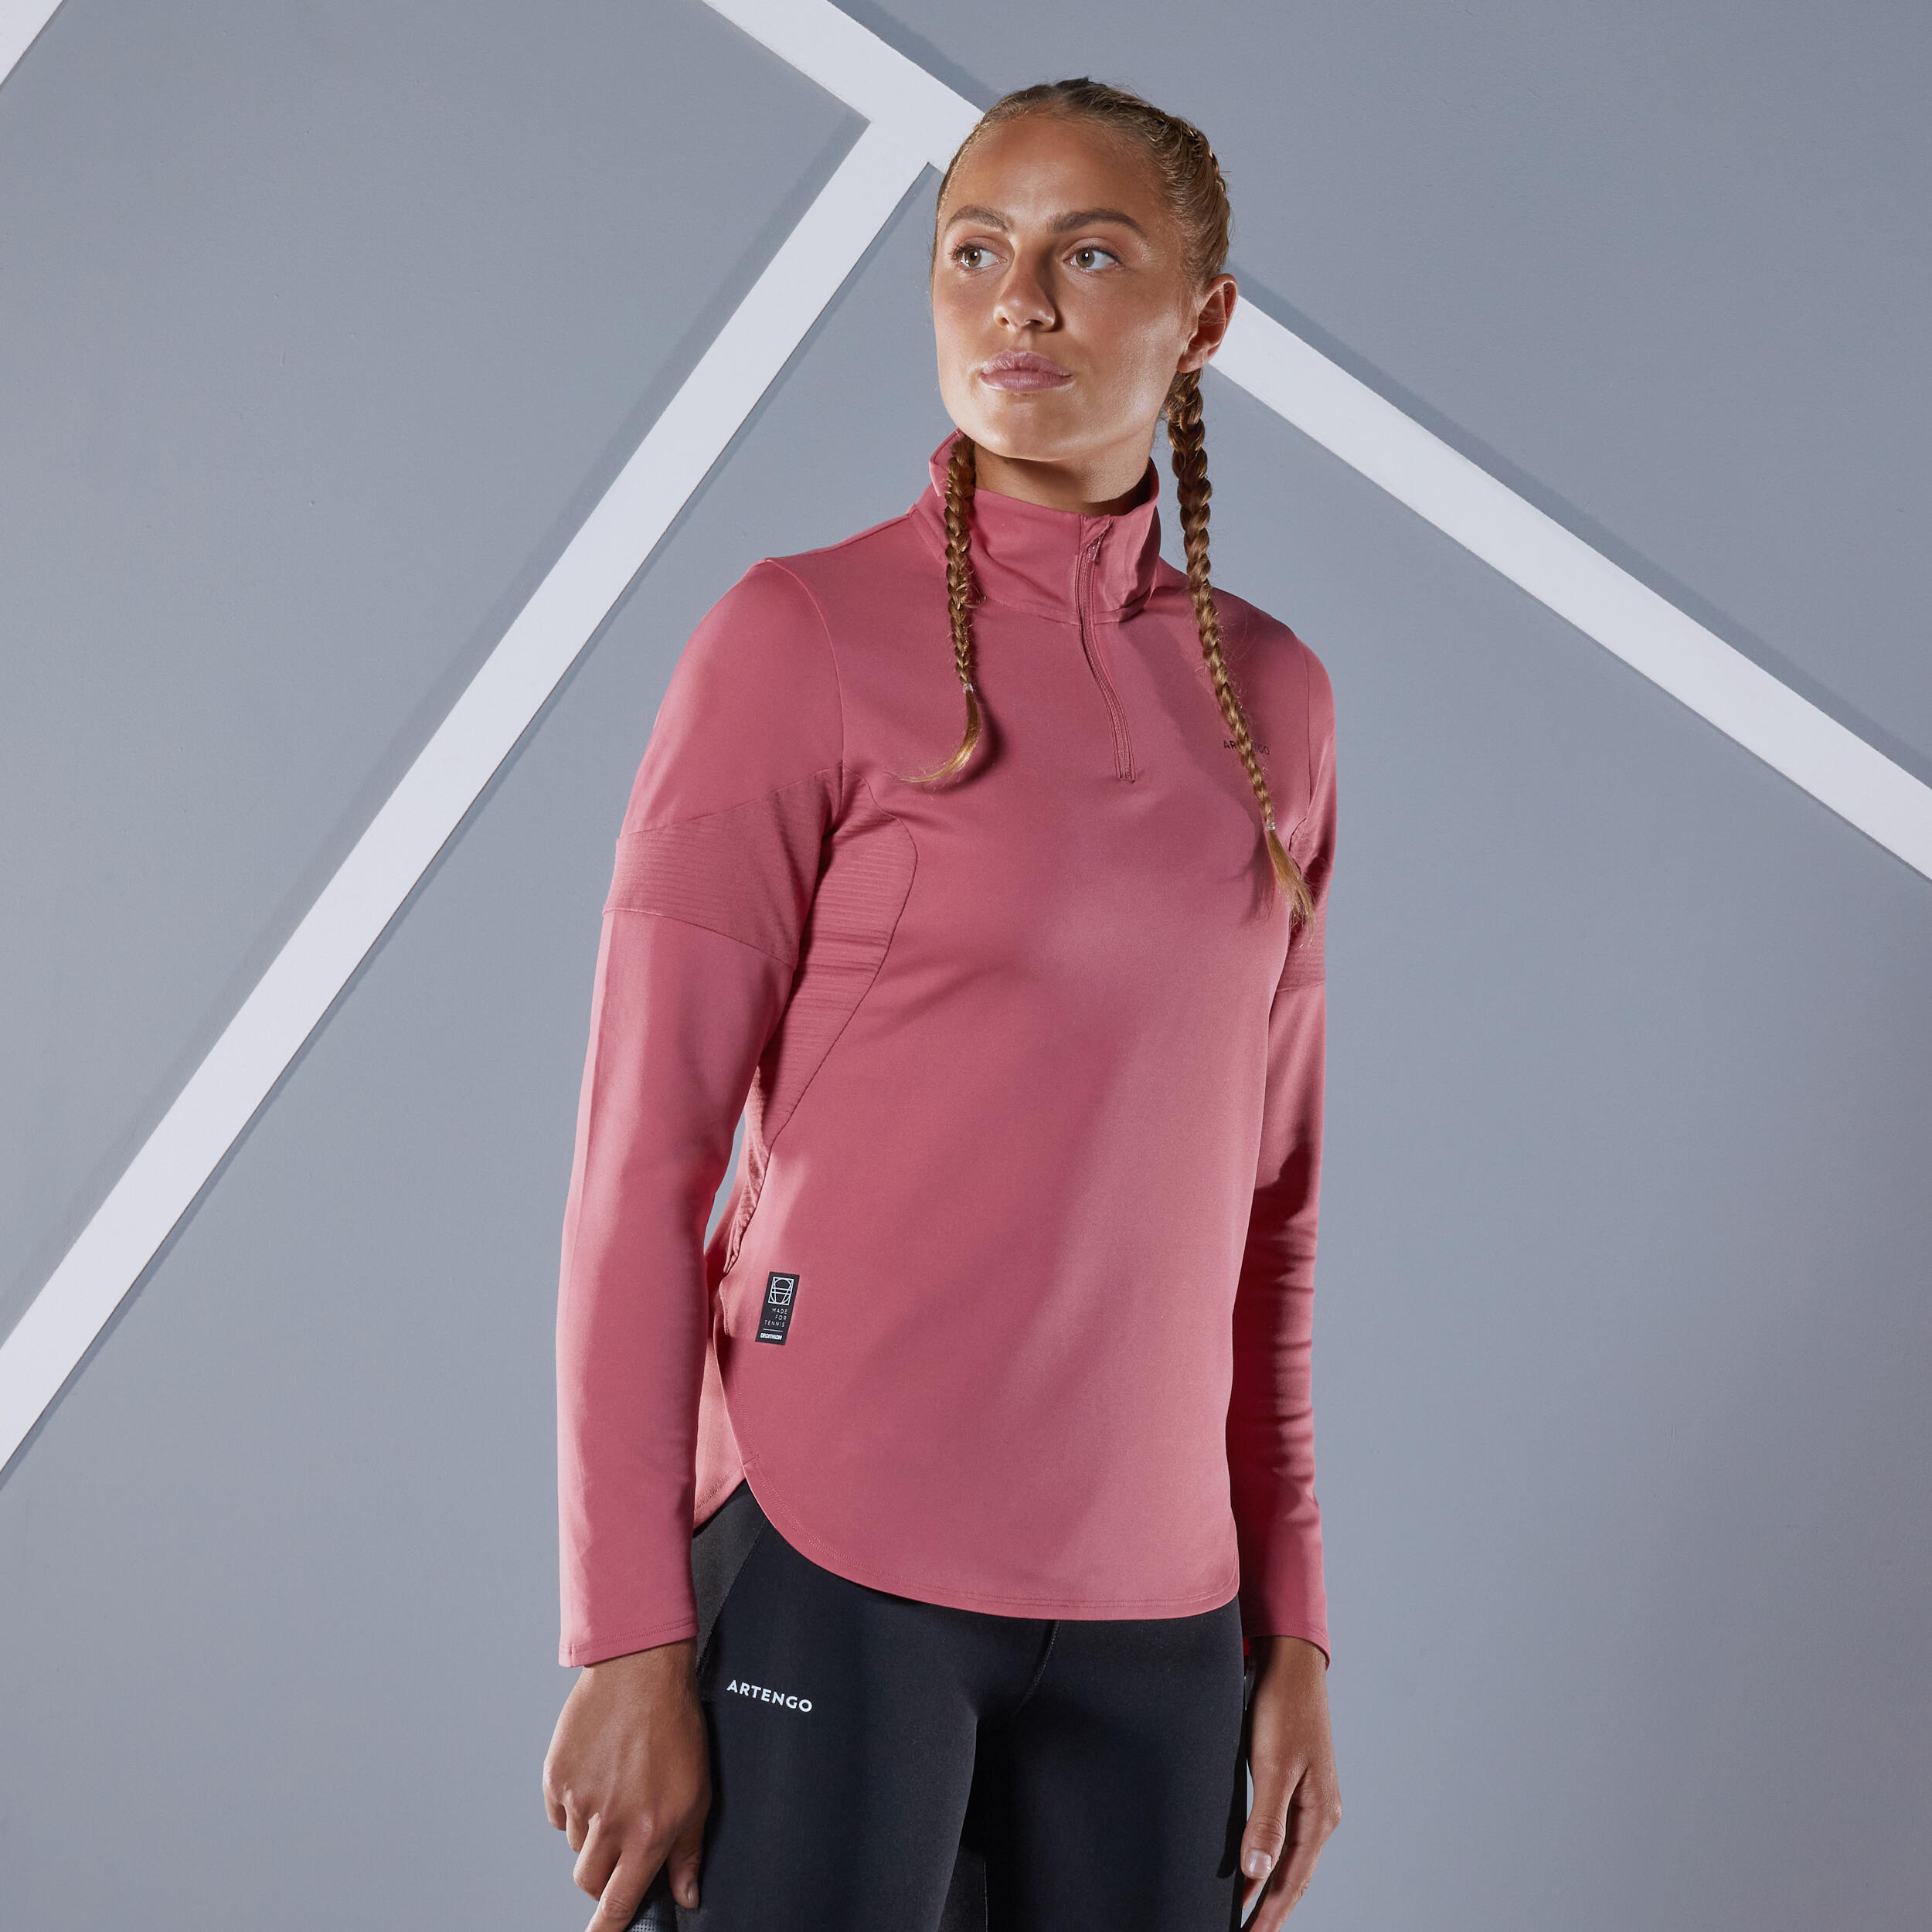 Women's Long-Sleeved Thermal T-Shirt TH 900 - Pink 3/7